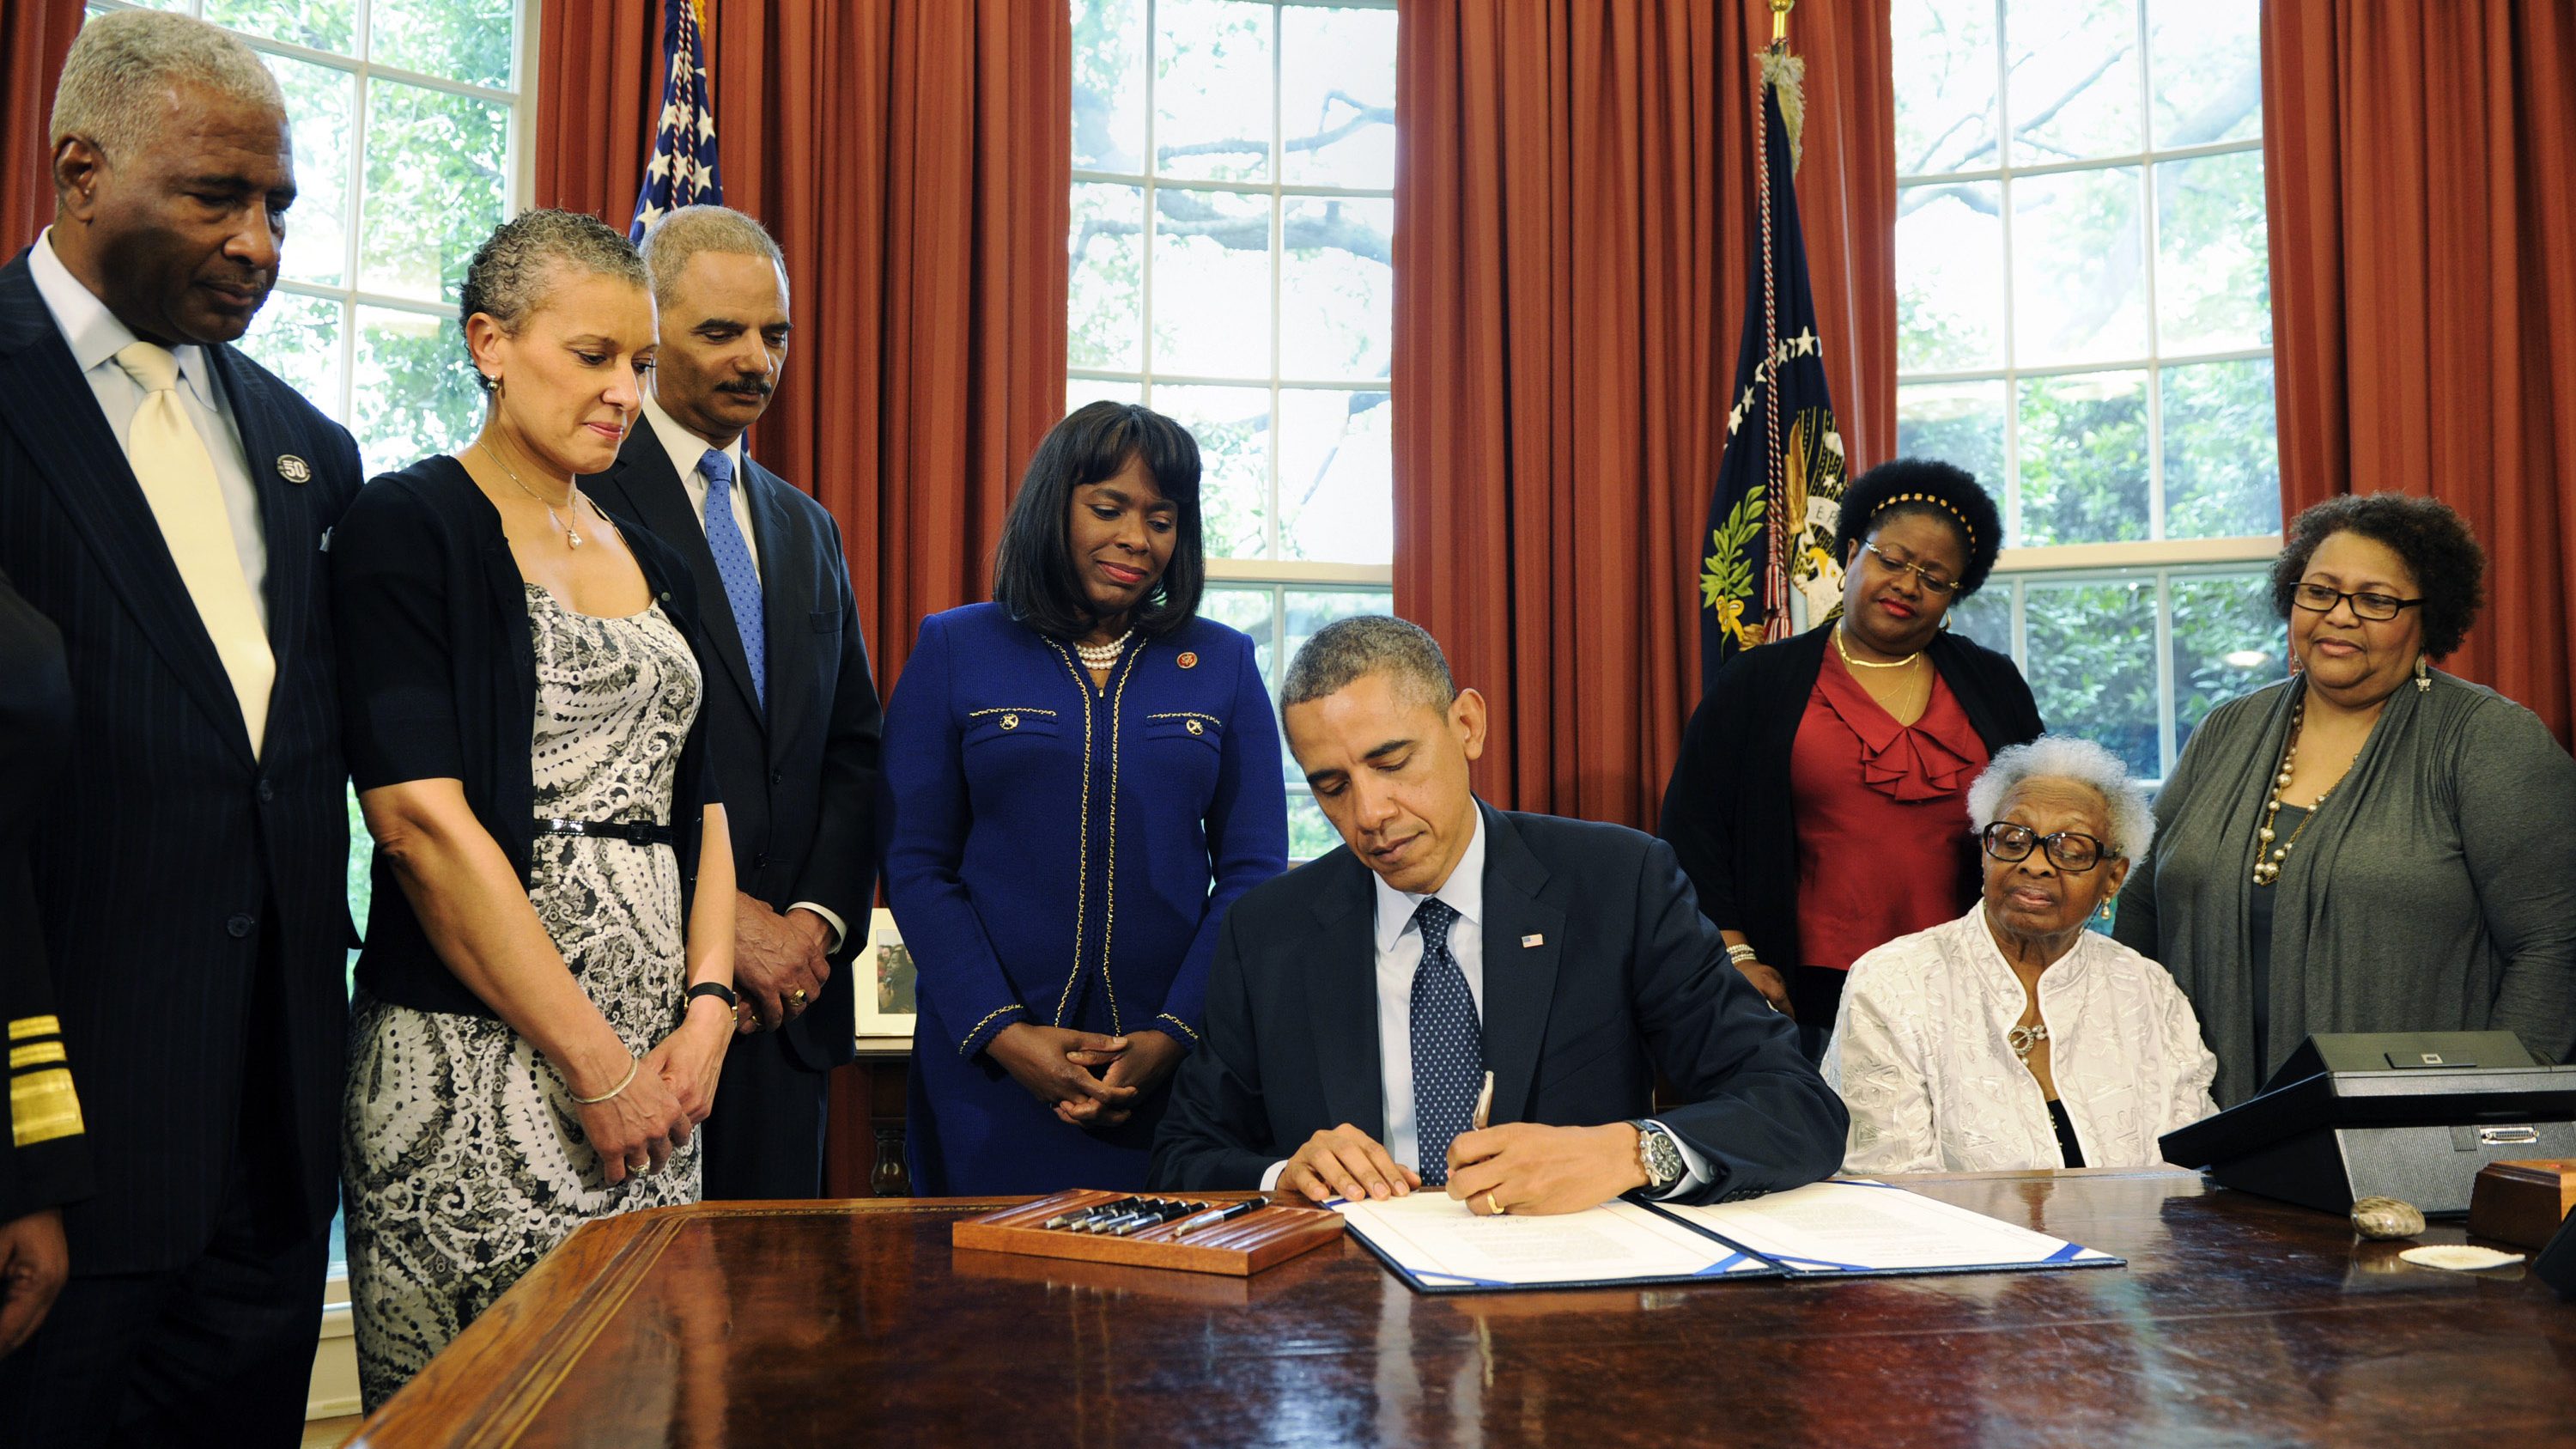 Barack Obama designates the Congressional Gold Medal to commemorate the four young girls killed during the 1963 bombing of 16th Street Baptist Church in Birmingham, Alabama, as Birmingham Mayor William Bell, Dr. Sharon Malone Holder, Attorney General Eric Holder, Rep. Terri Sewell, Thelma Pippen McNair, Lisa McNair and Dianne Braddock look on May 24, 2013, in Washington, D.C. 